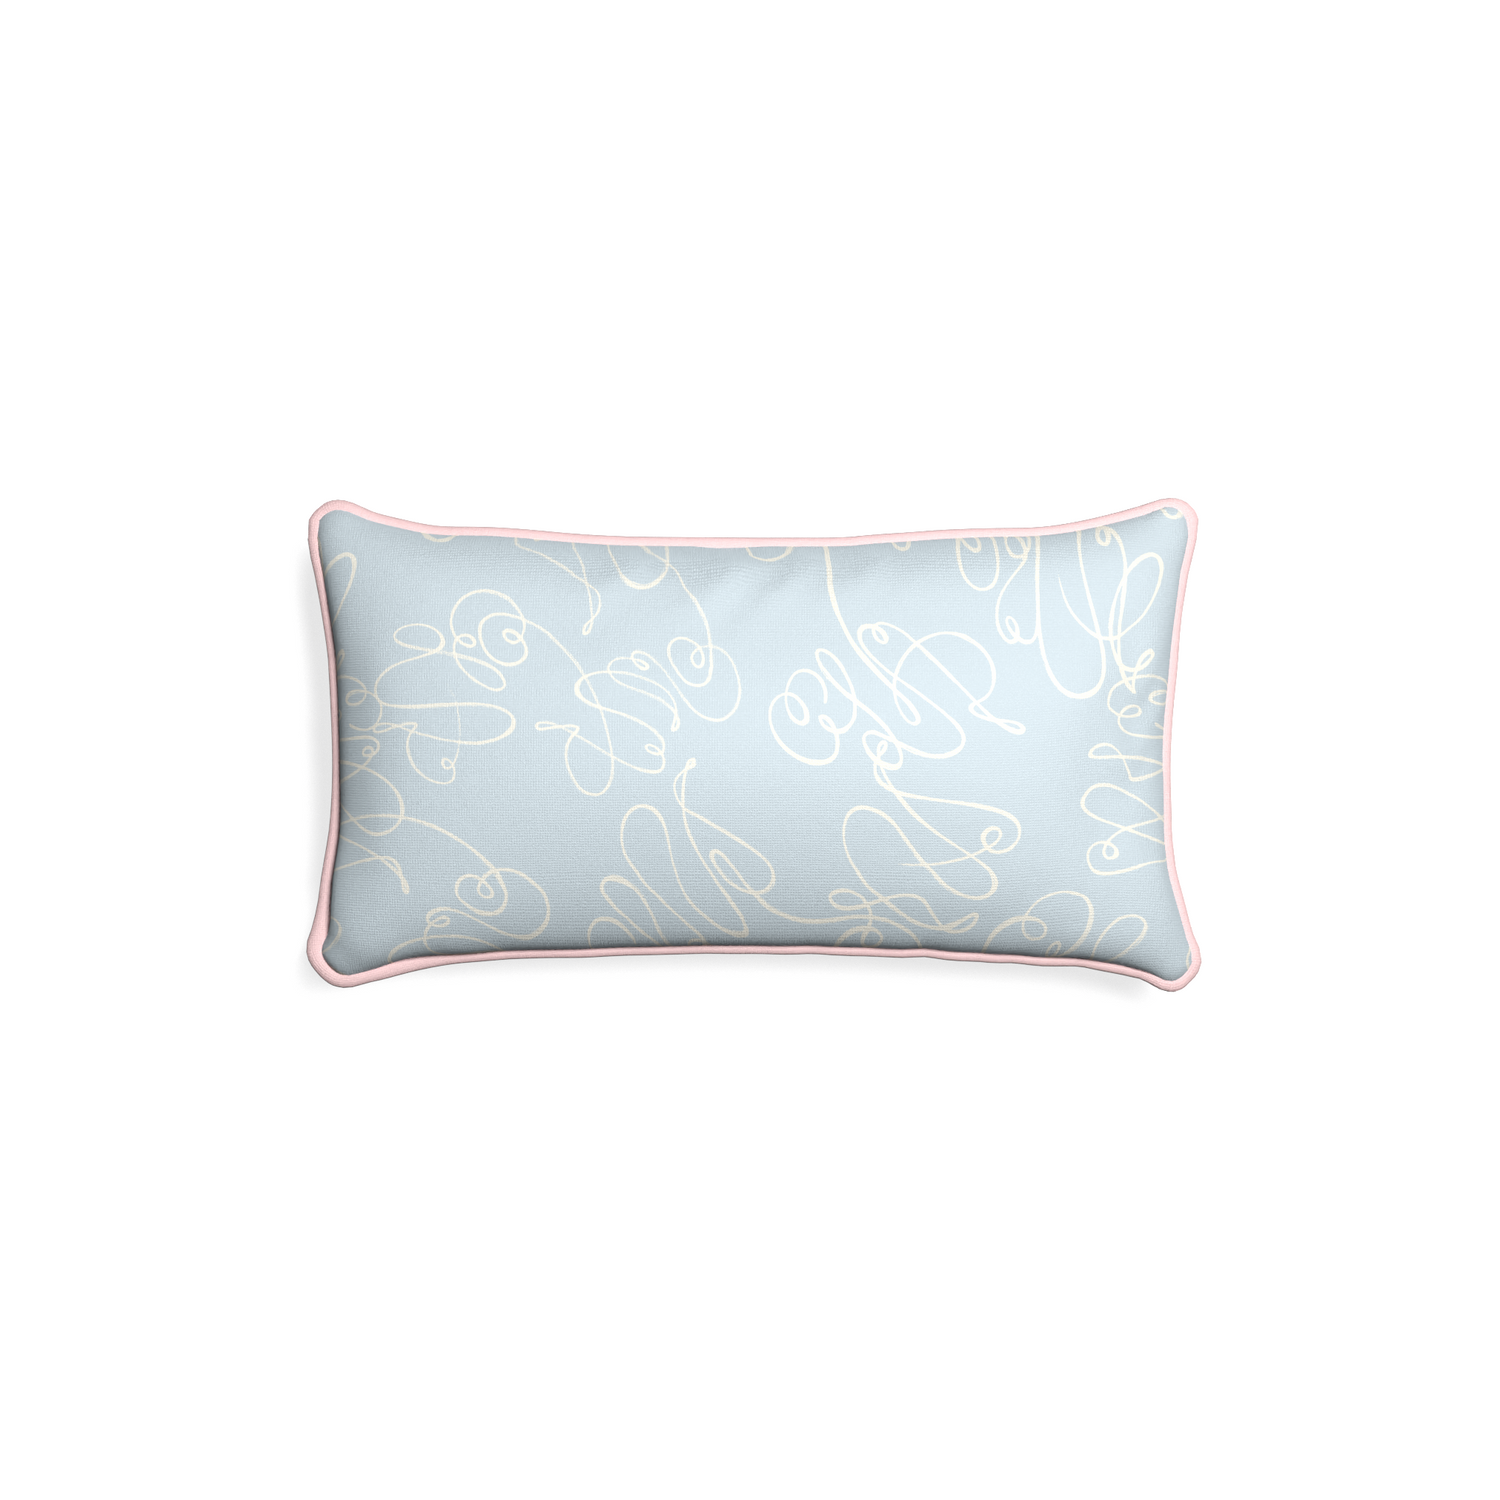 Petite-lumbar mirabella custom powder blue abstractpillow with petal piping on white background